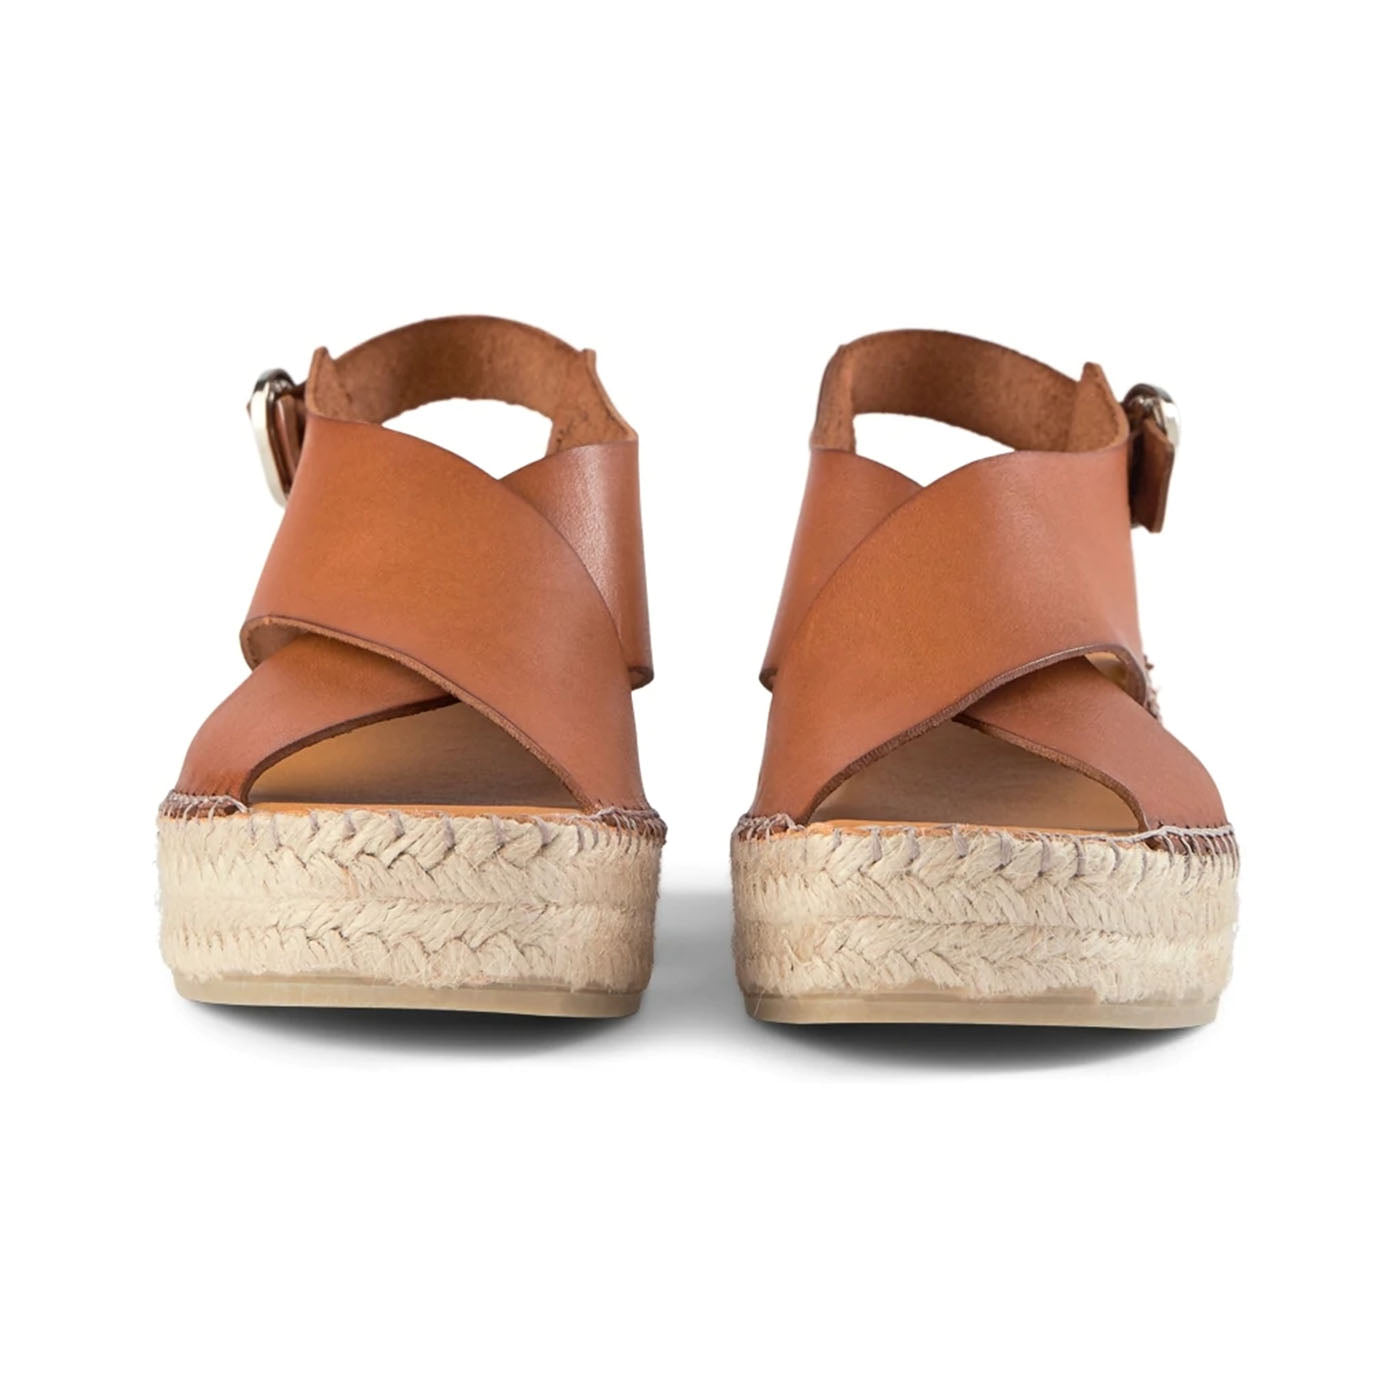 SHOE THE BEAR WOMENS Orchid wedge leather Espadrilles 135 TAN